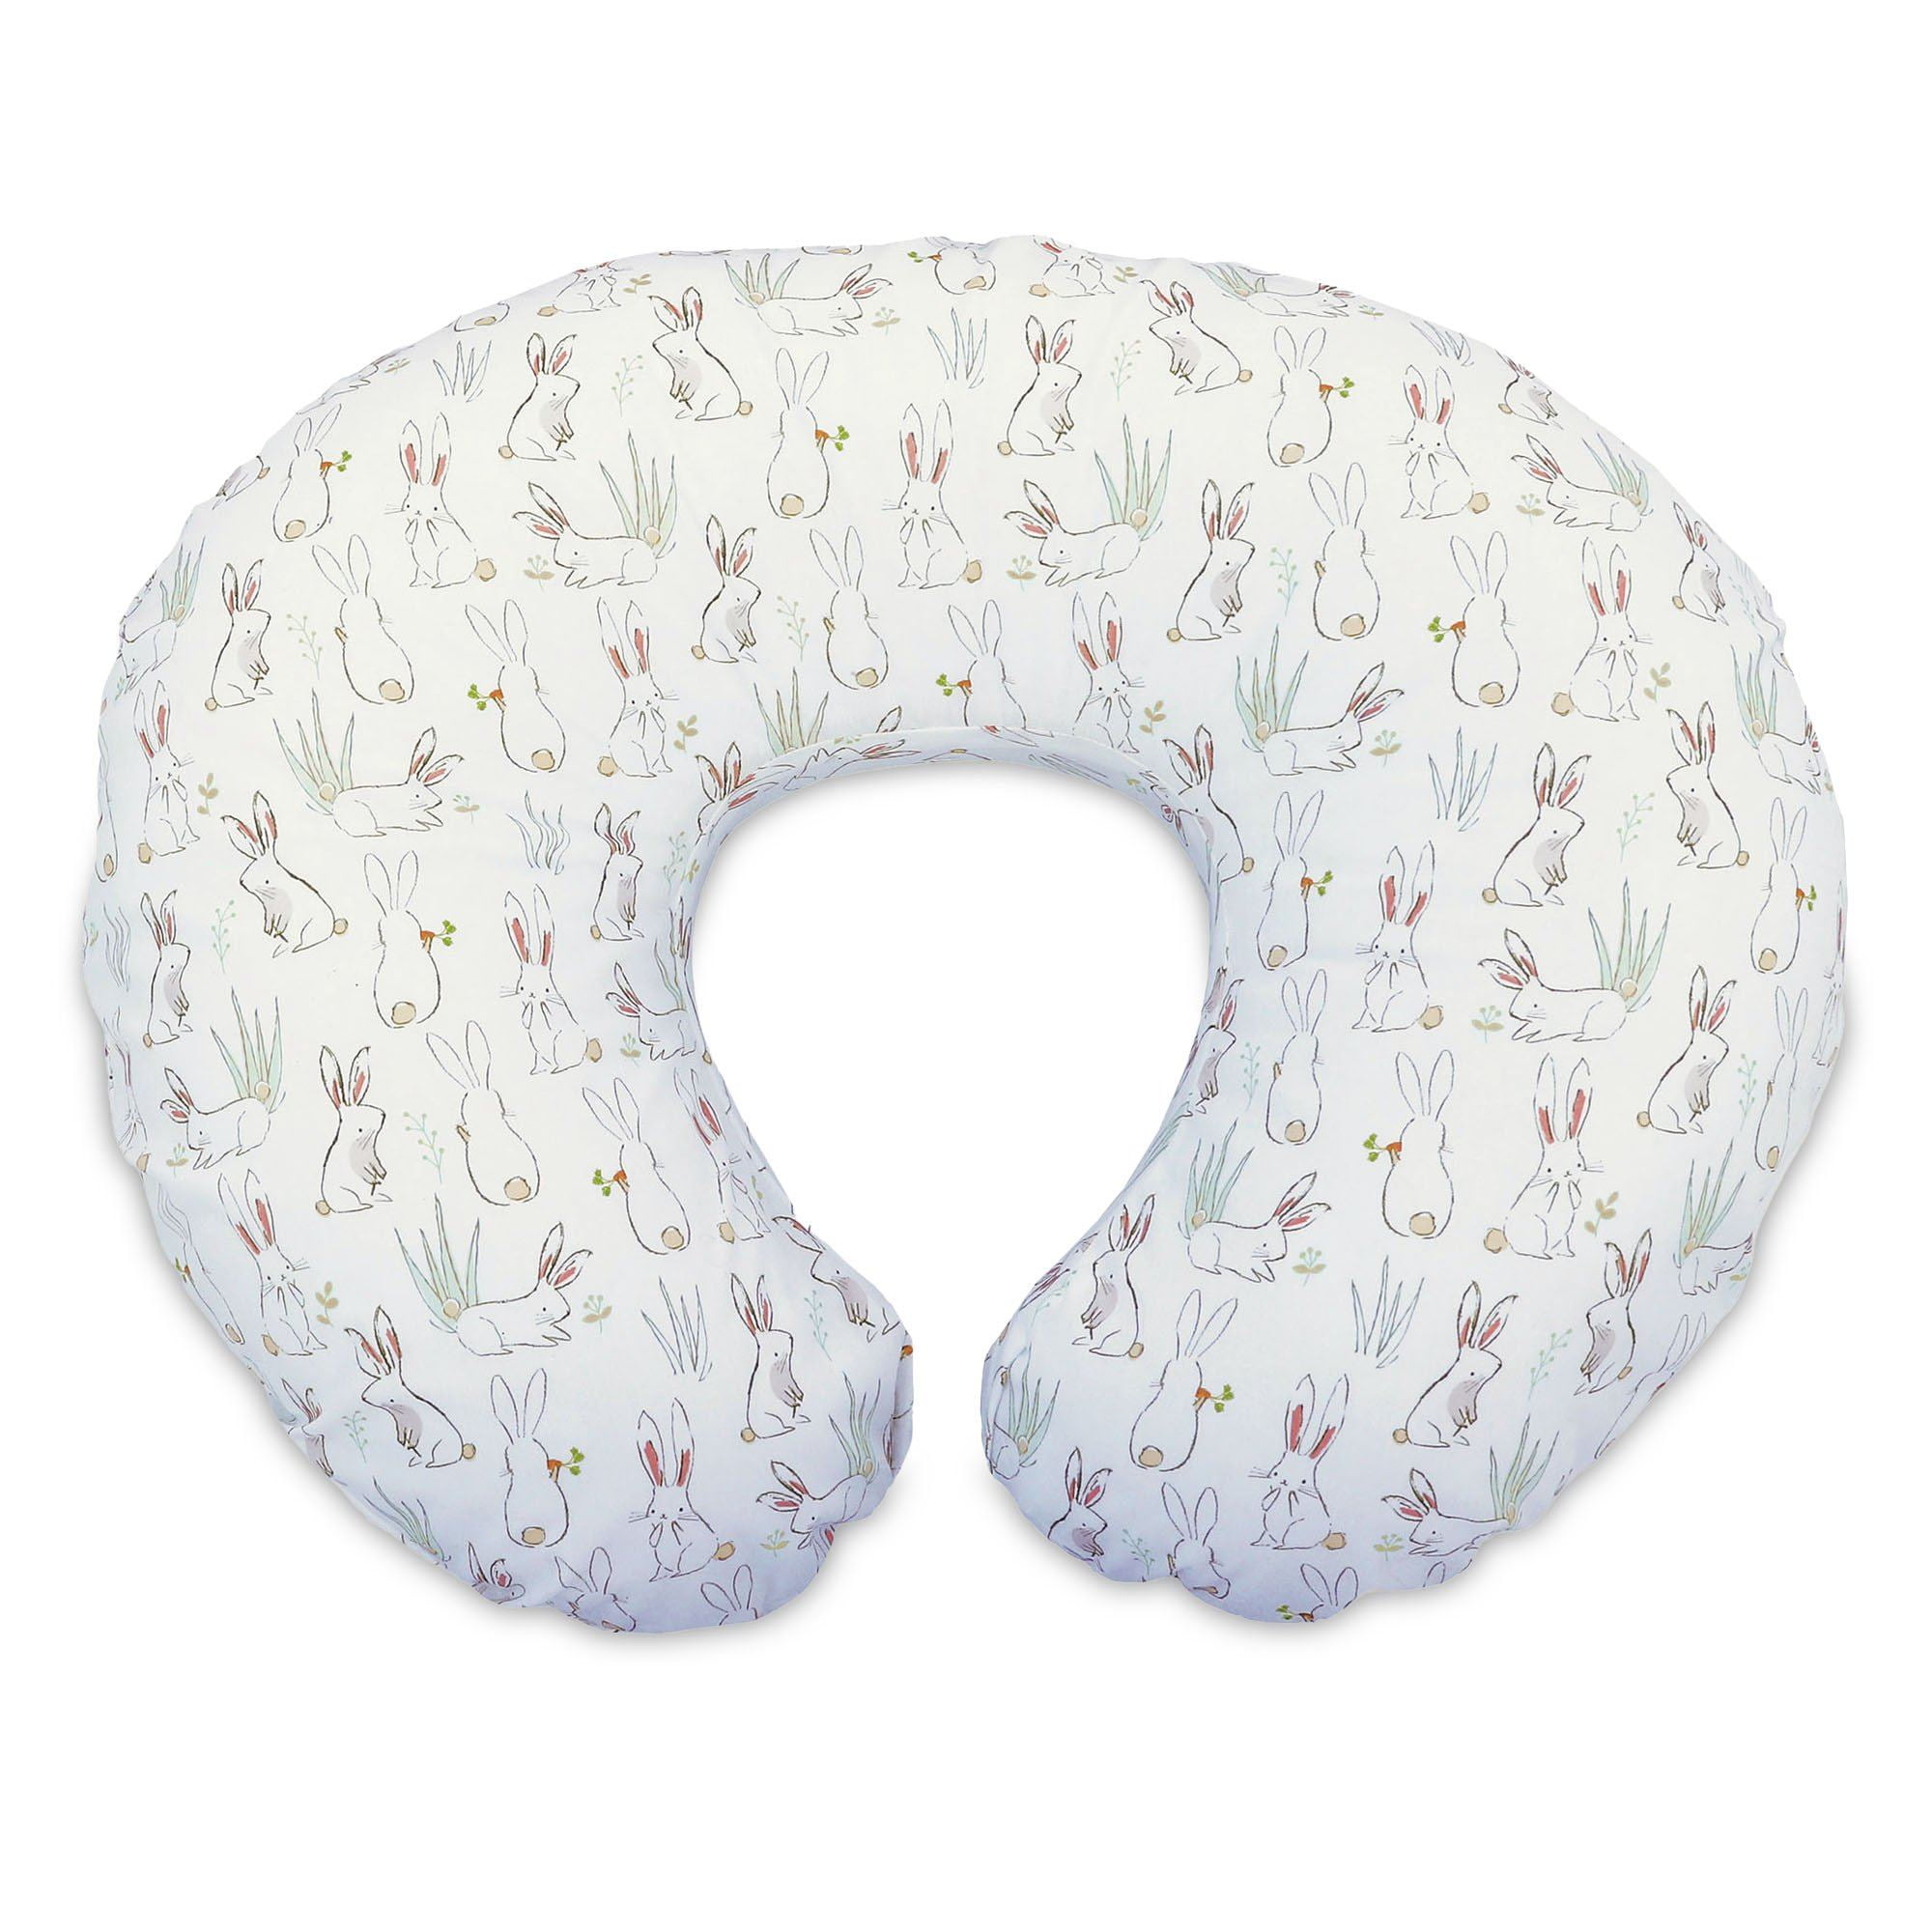 Boppy pillows for hobbies and posture support.